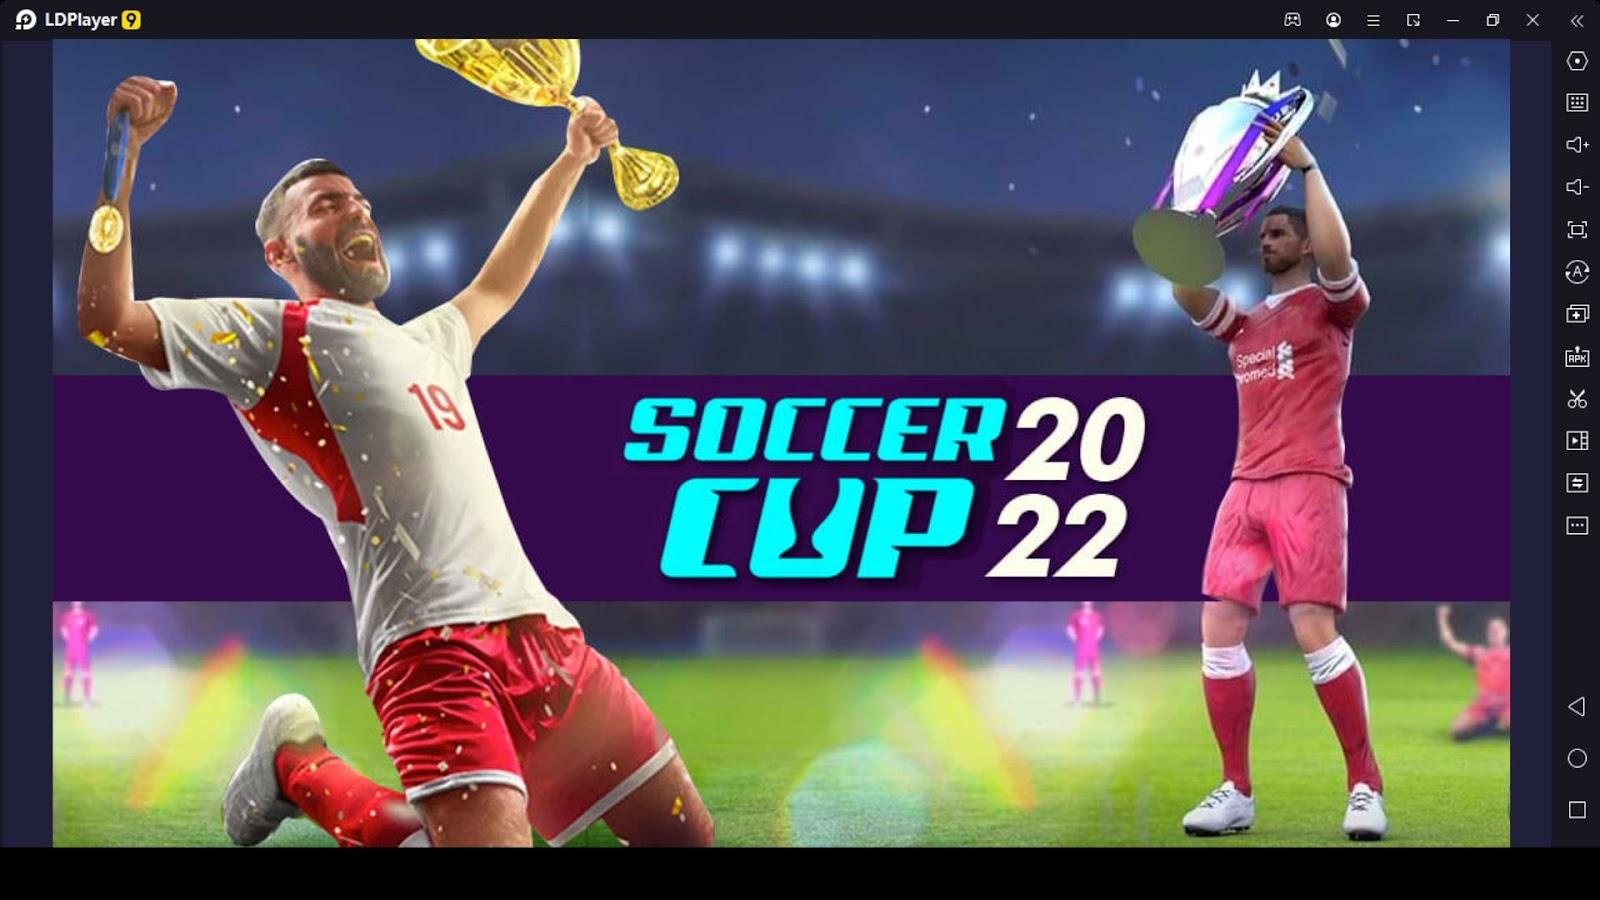 Soccer Cup 2022